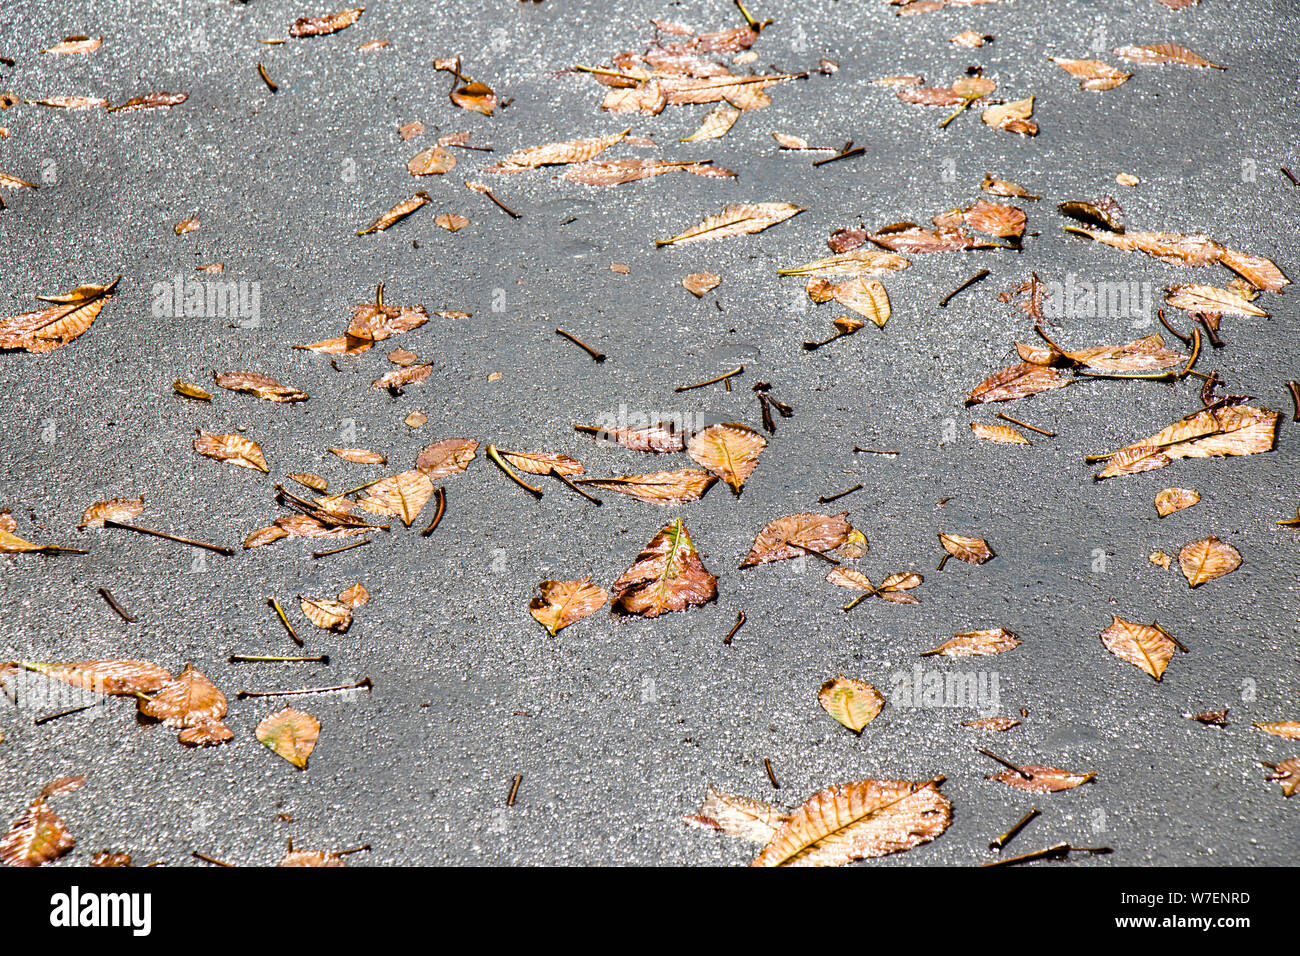 Fallen leaves on the wet ground shining after summer rain Stock Photo